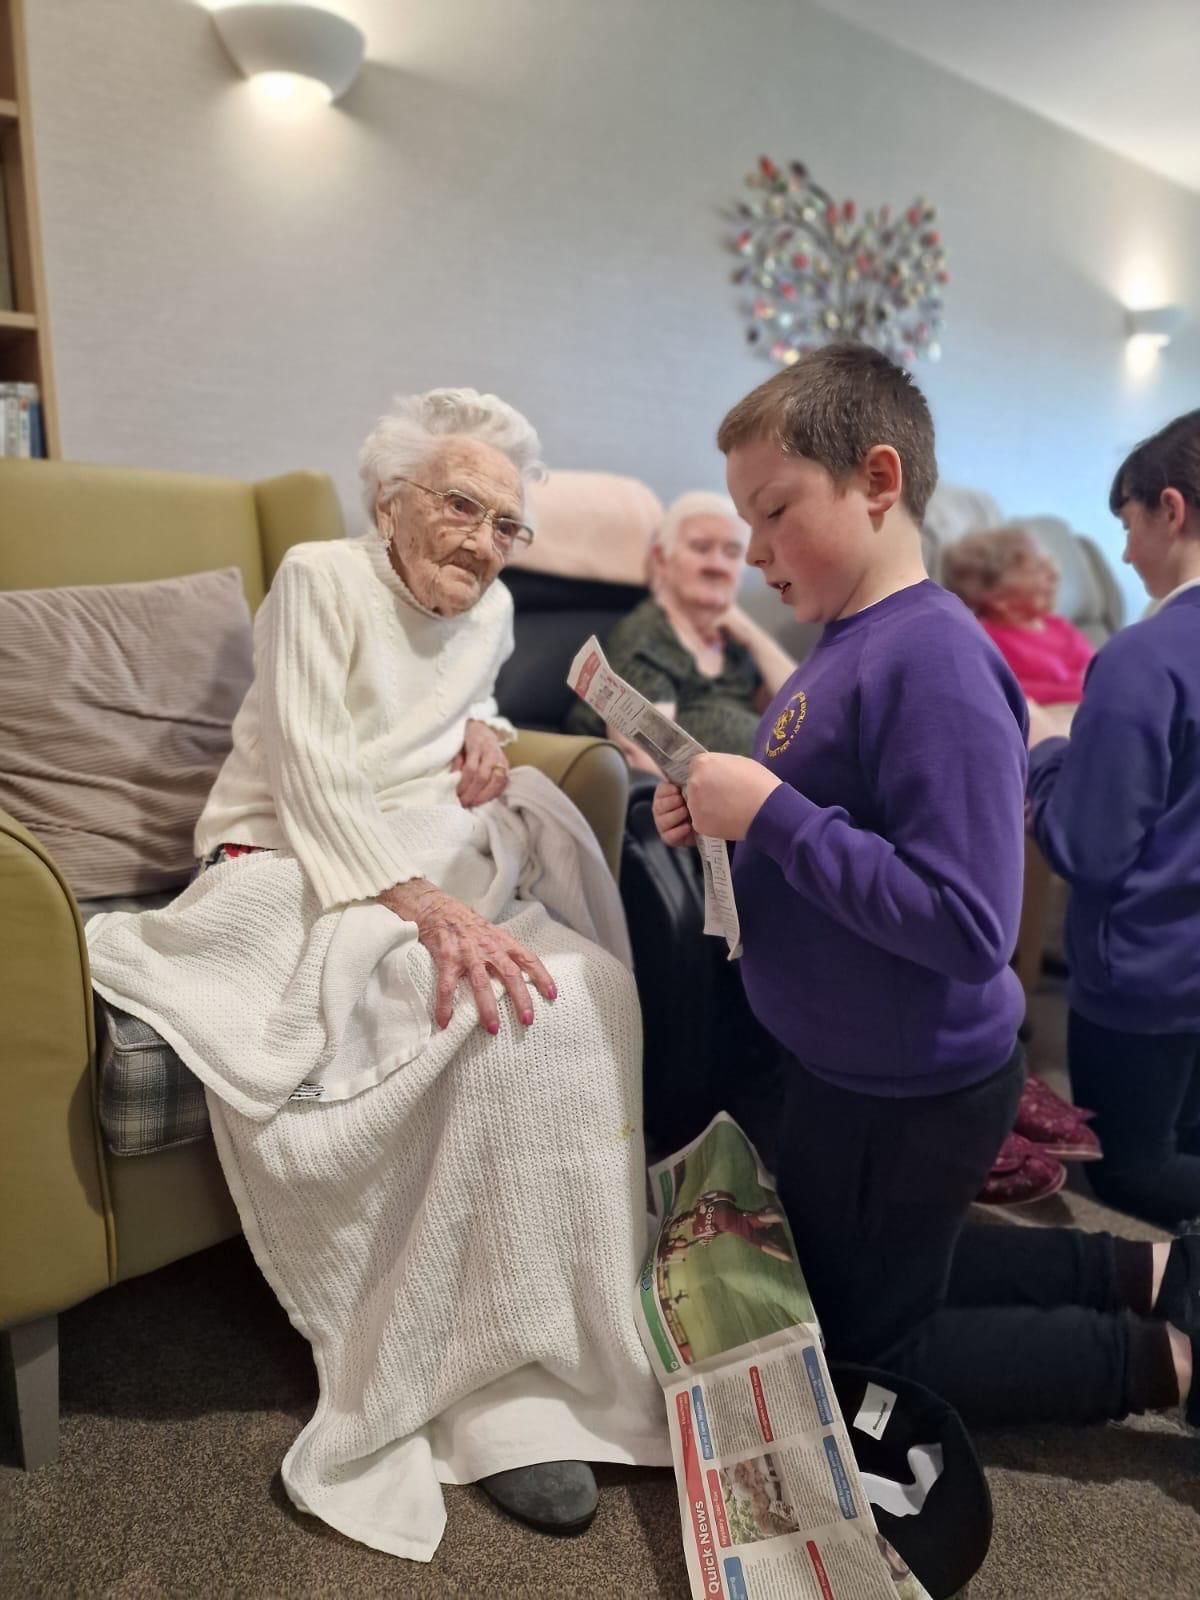 Pupils from Westwood CP School visit residents of Marleyfield Care Home in Buckley.